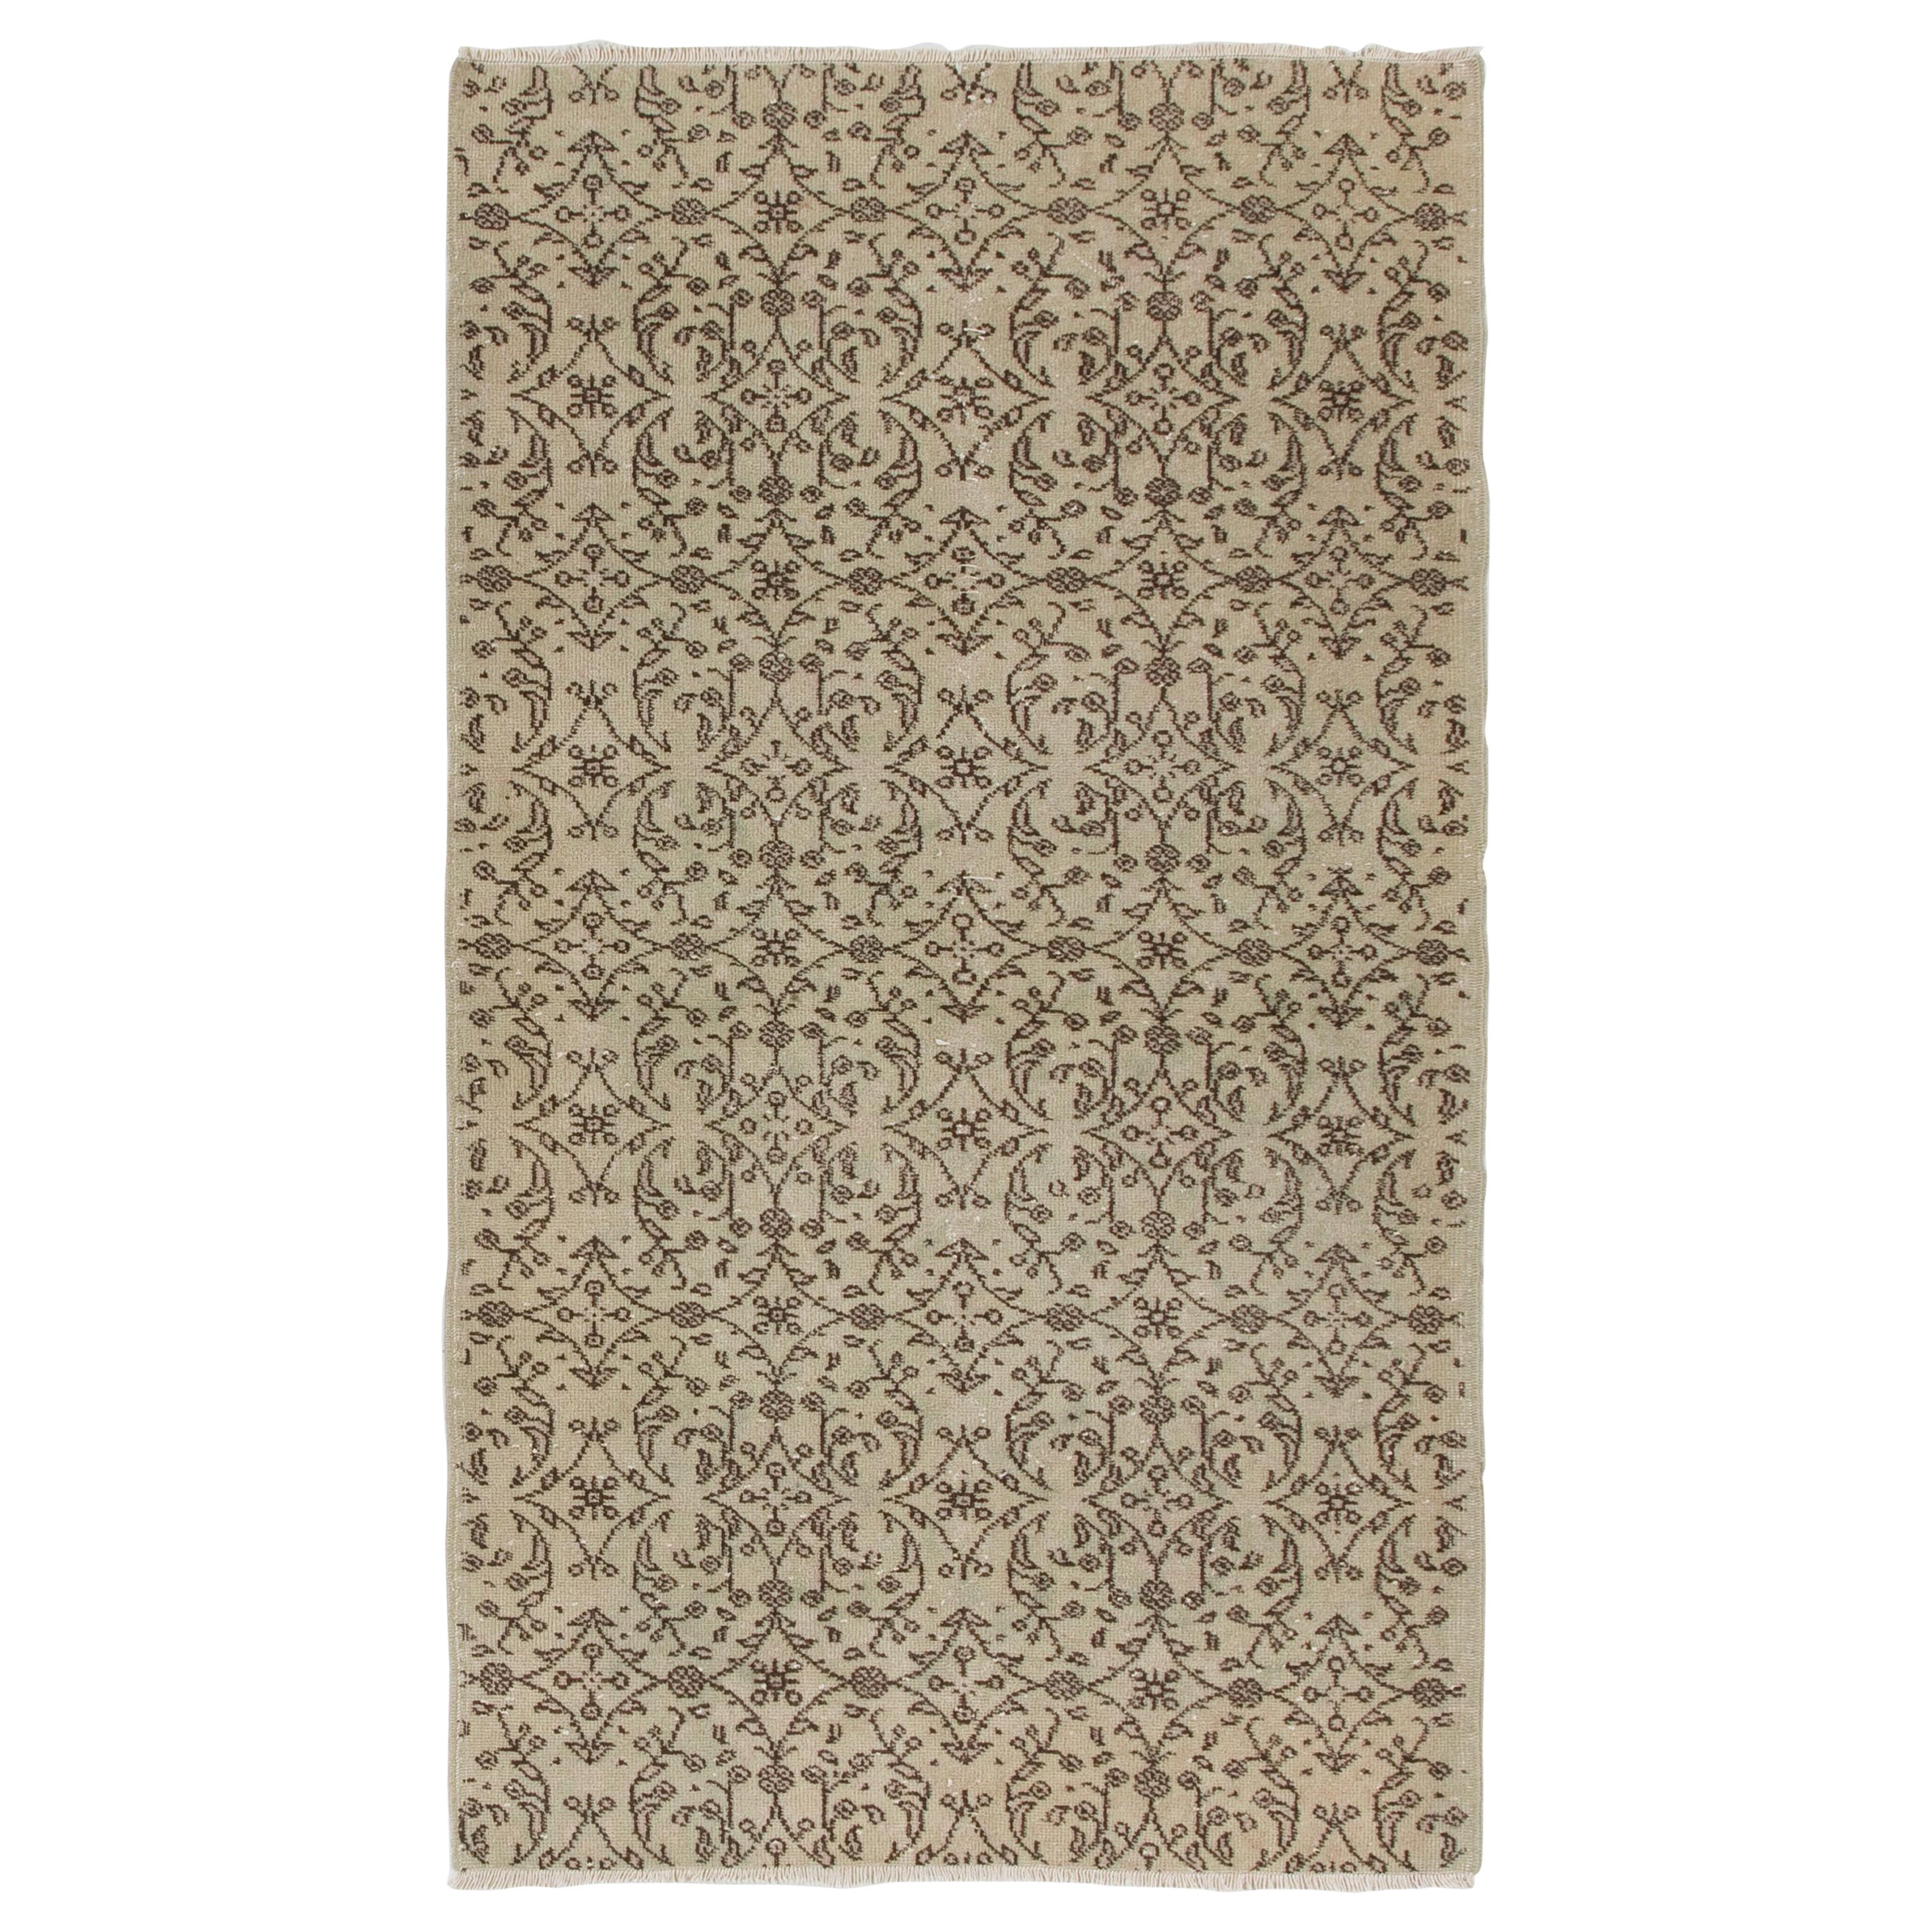 Hand-Knotted Vintage Floral Patterned Turkish Rug in Neutral Colors